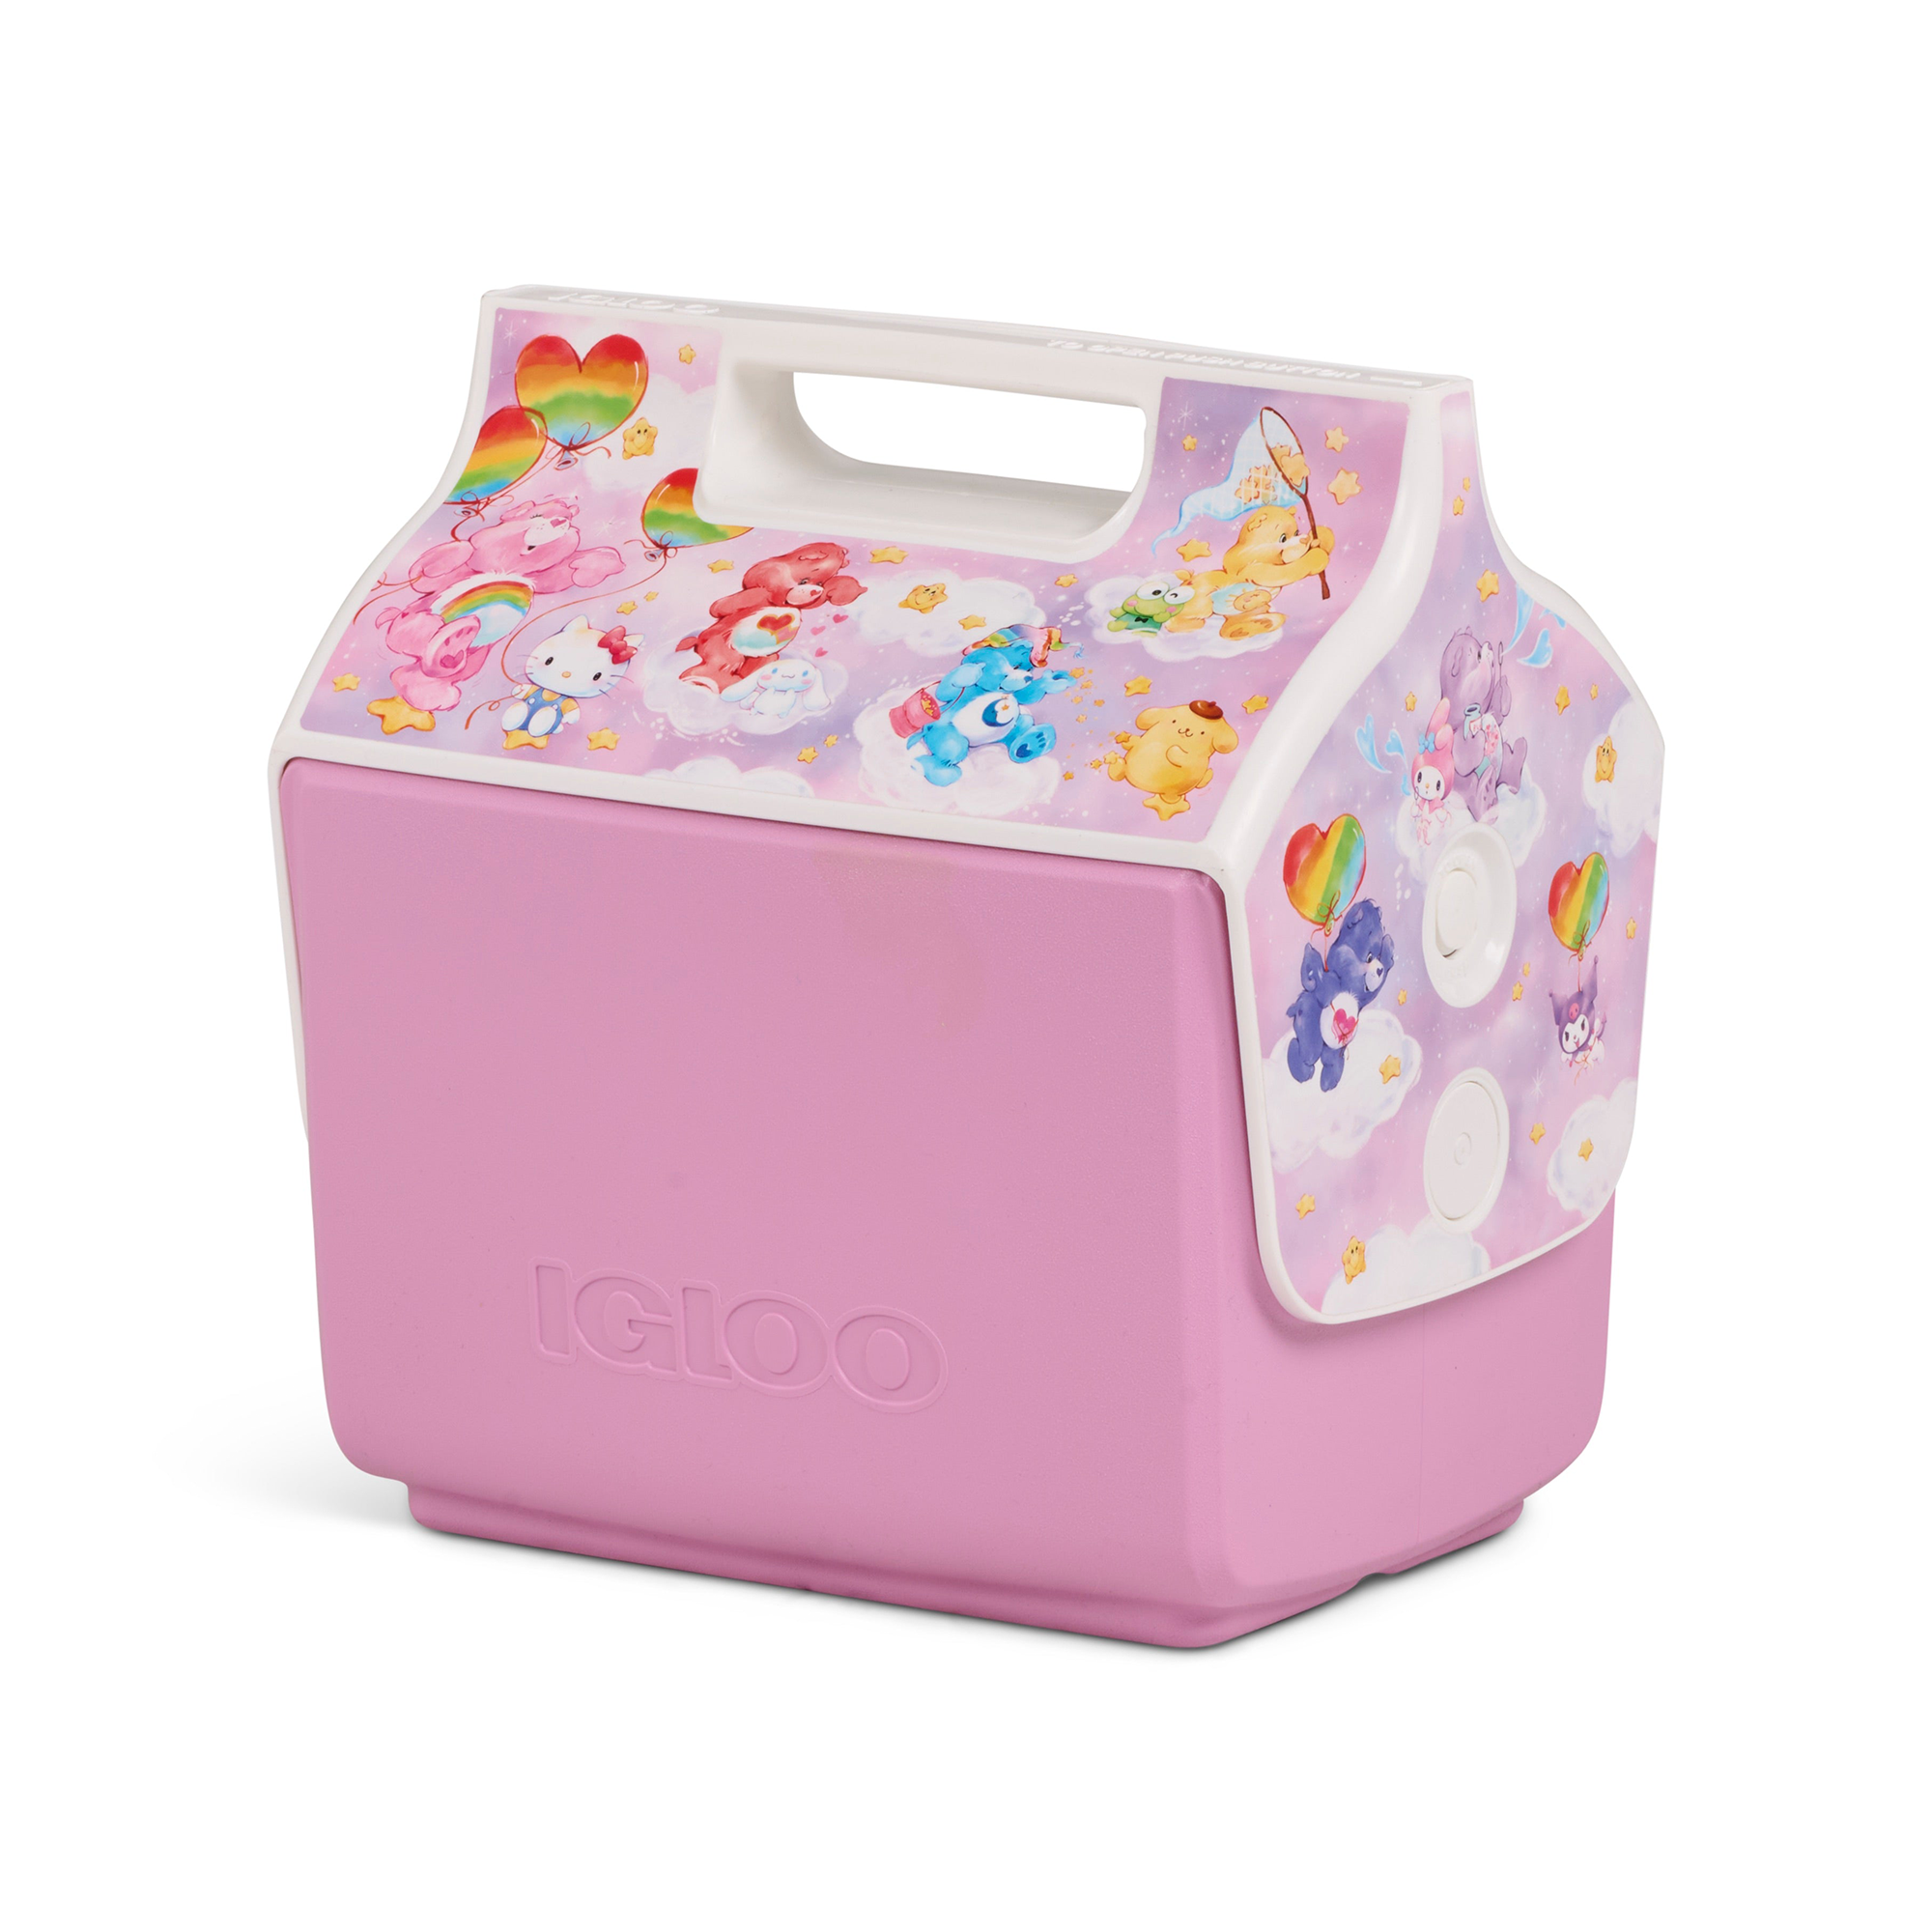 Hello Kitty and Friends x Care Bears Igloo Little Playmate 7 Qt Cooler Travel Igloo Products Corp   